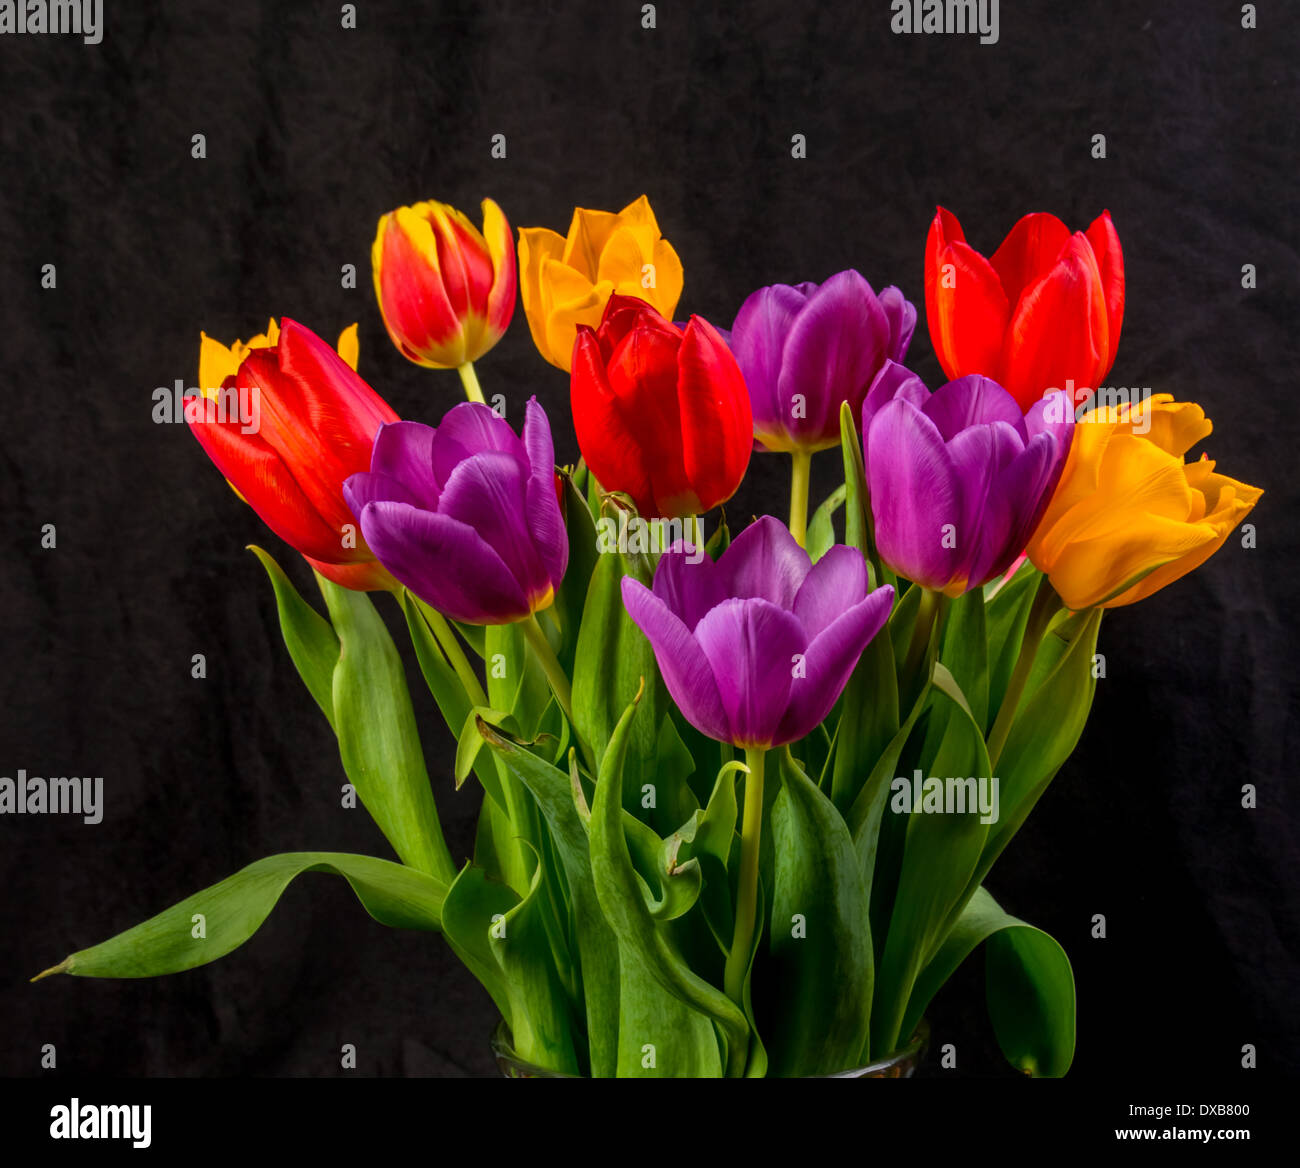 A bunch of tulips red purple and yellow on a black background Stock Photo